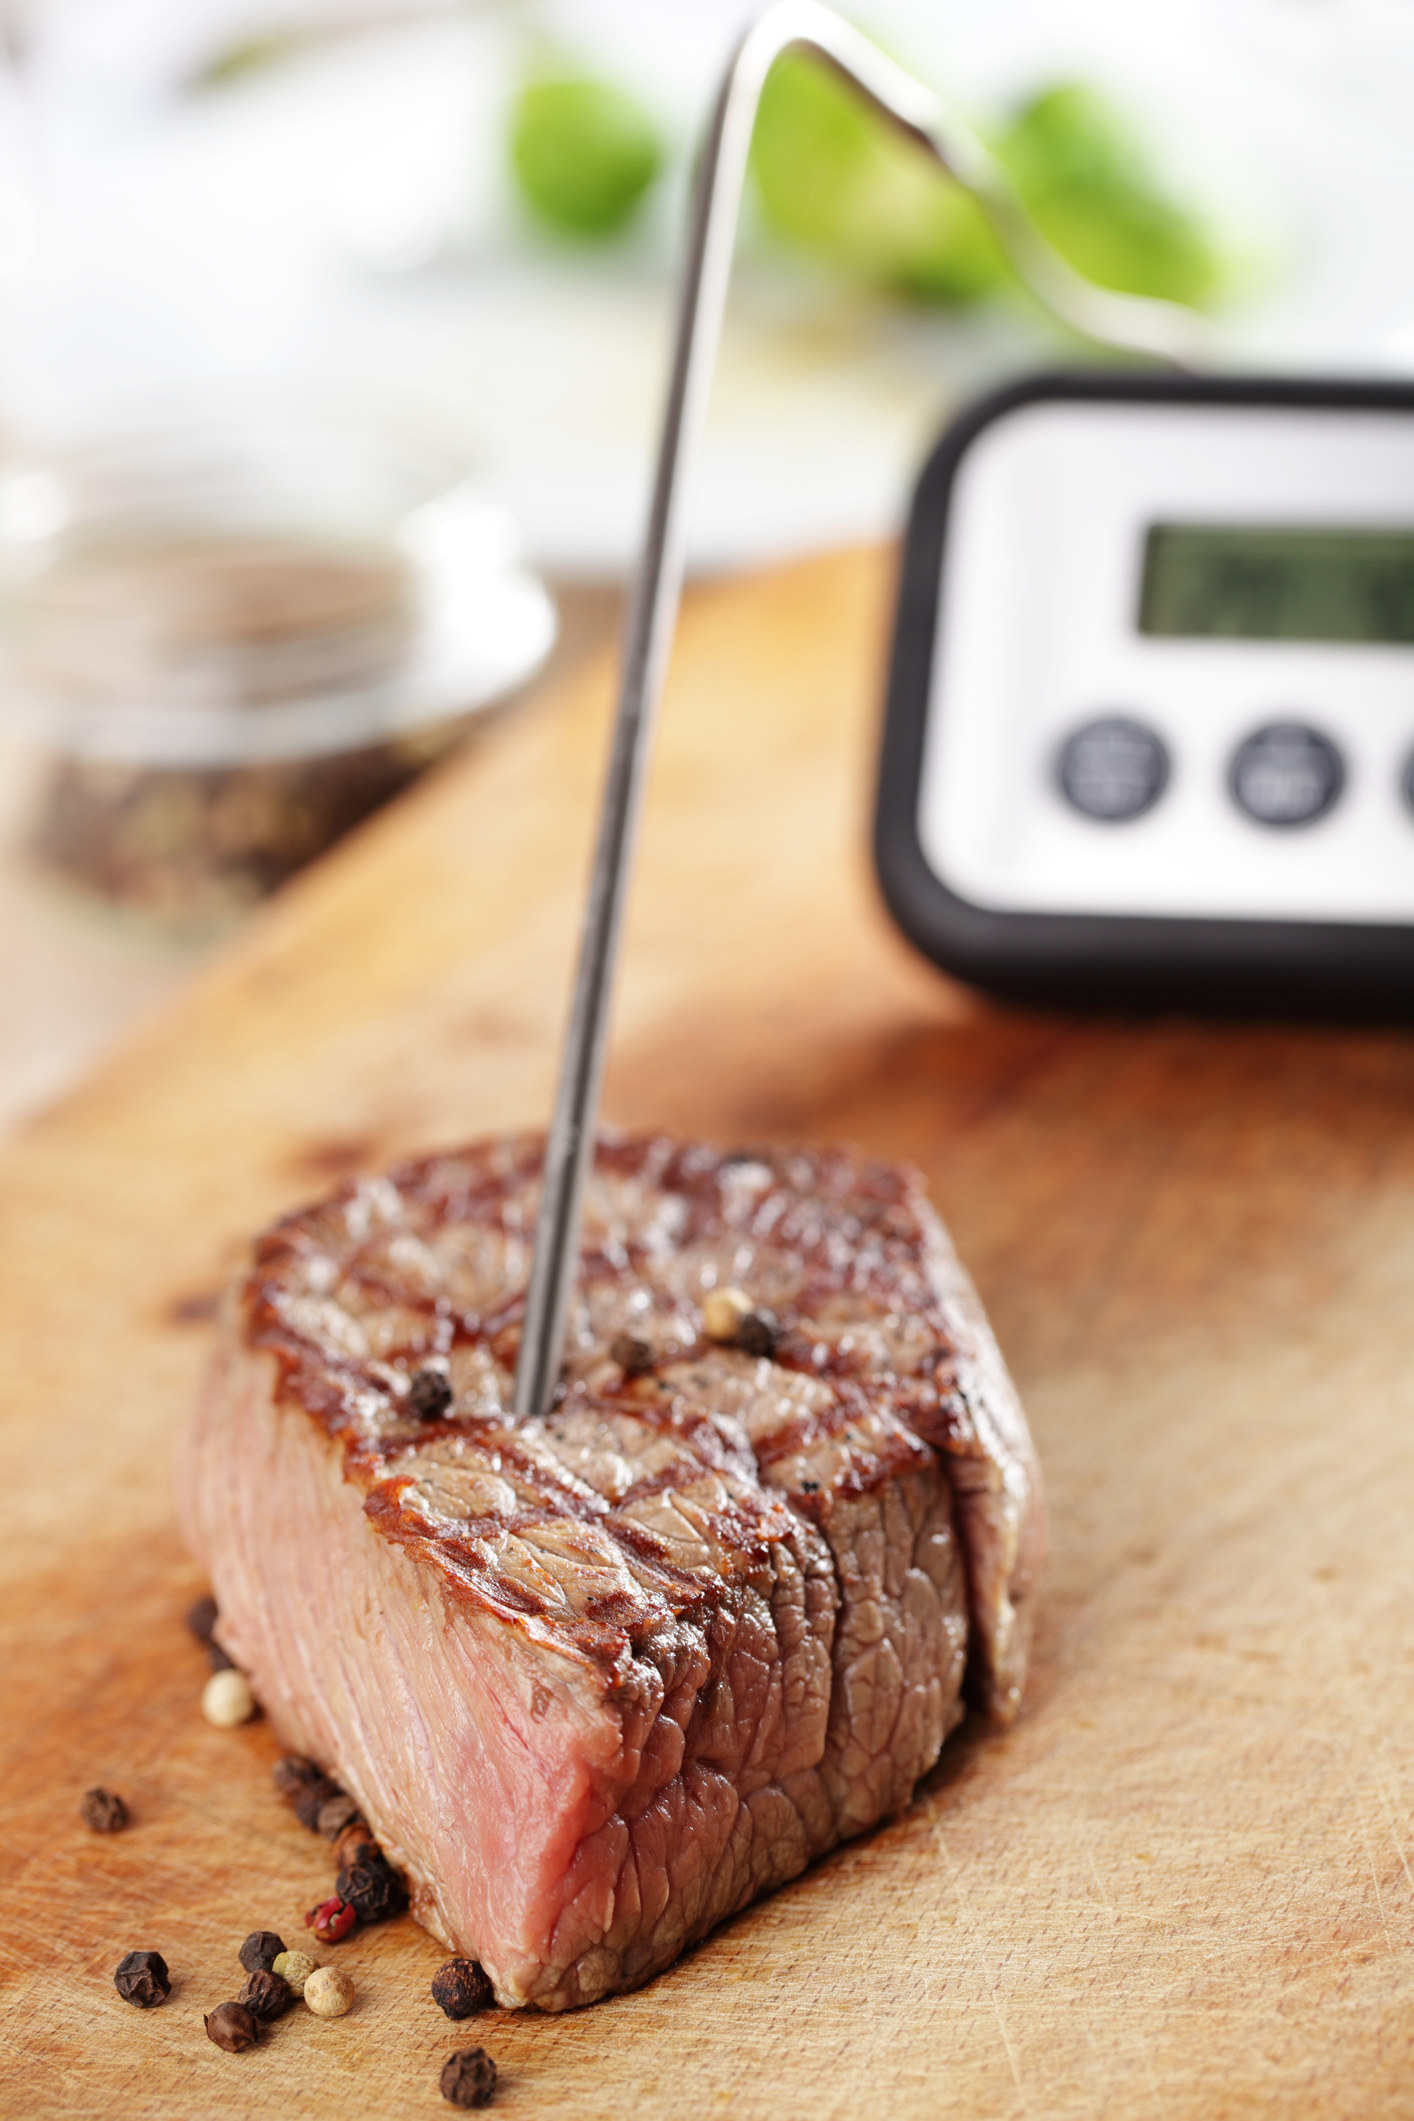 Checking the temperature of a piece of meat with a thermometer.